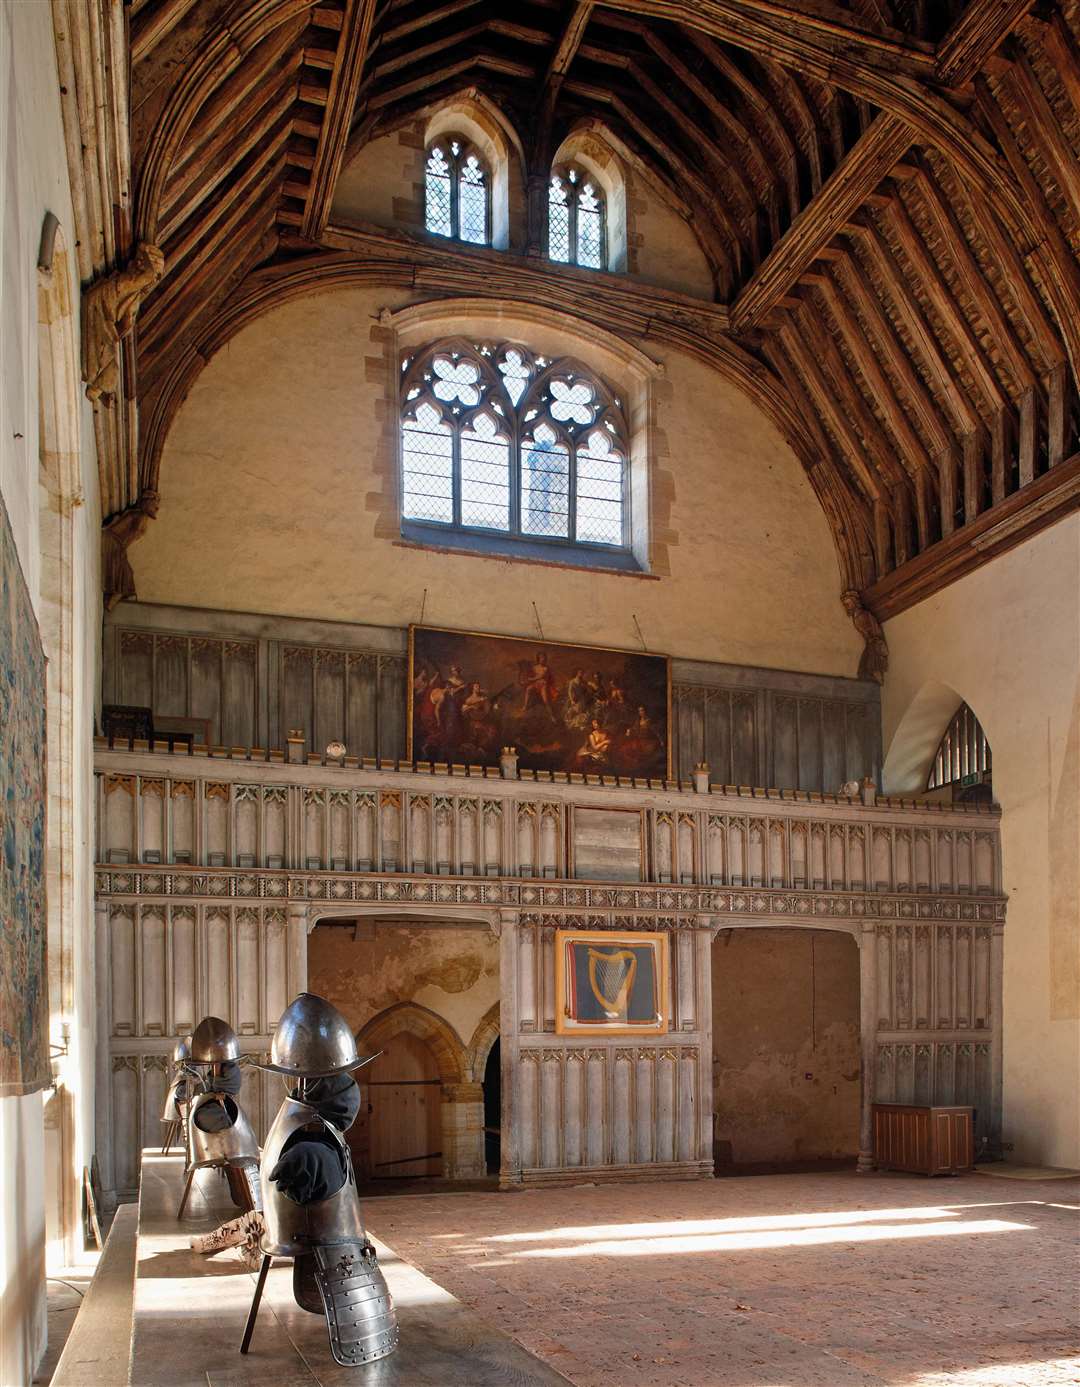 The medieval Baron's Hall at Penshurst Place will be the venue for the premiere